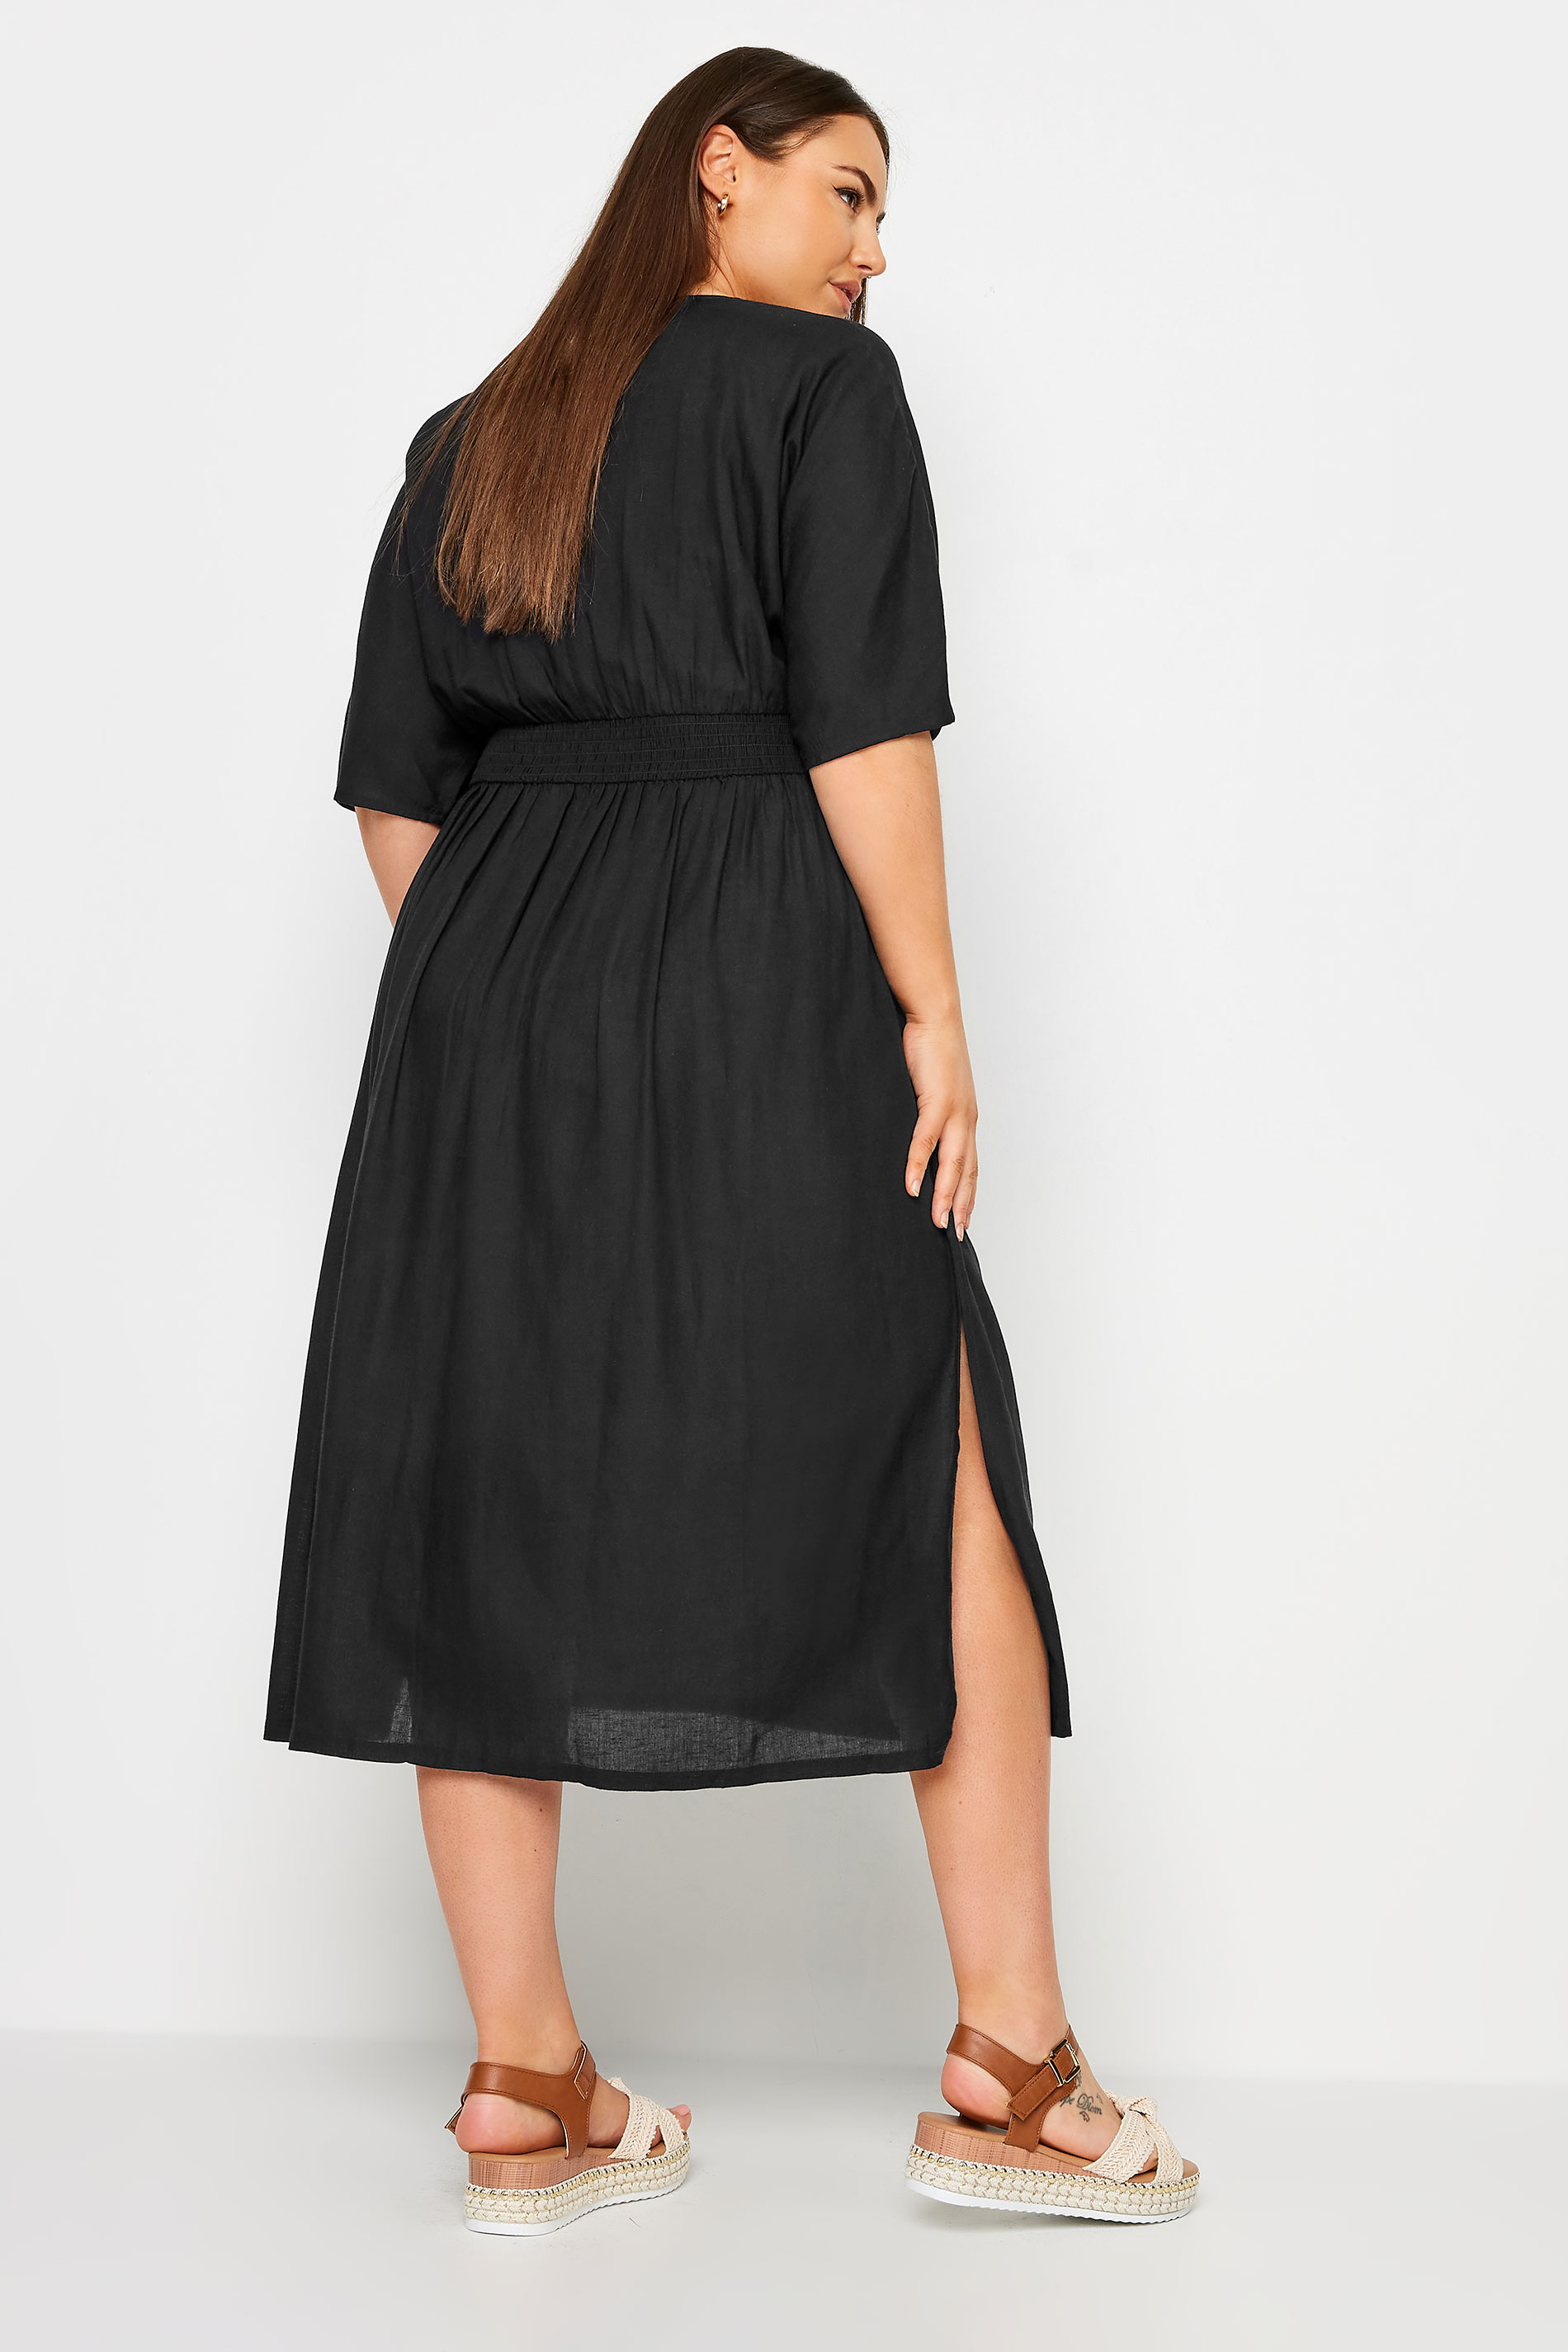 LIMITED COLLECTION Plus Size Black Linen Shirred Midaxi Dress | Yours Clothing 3